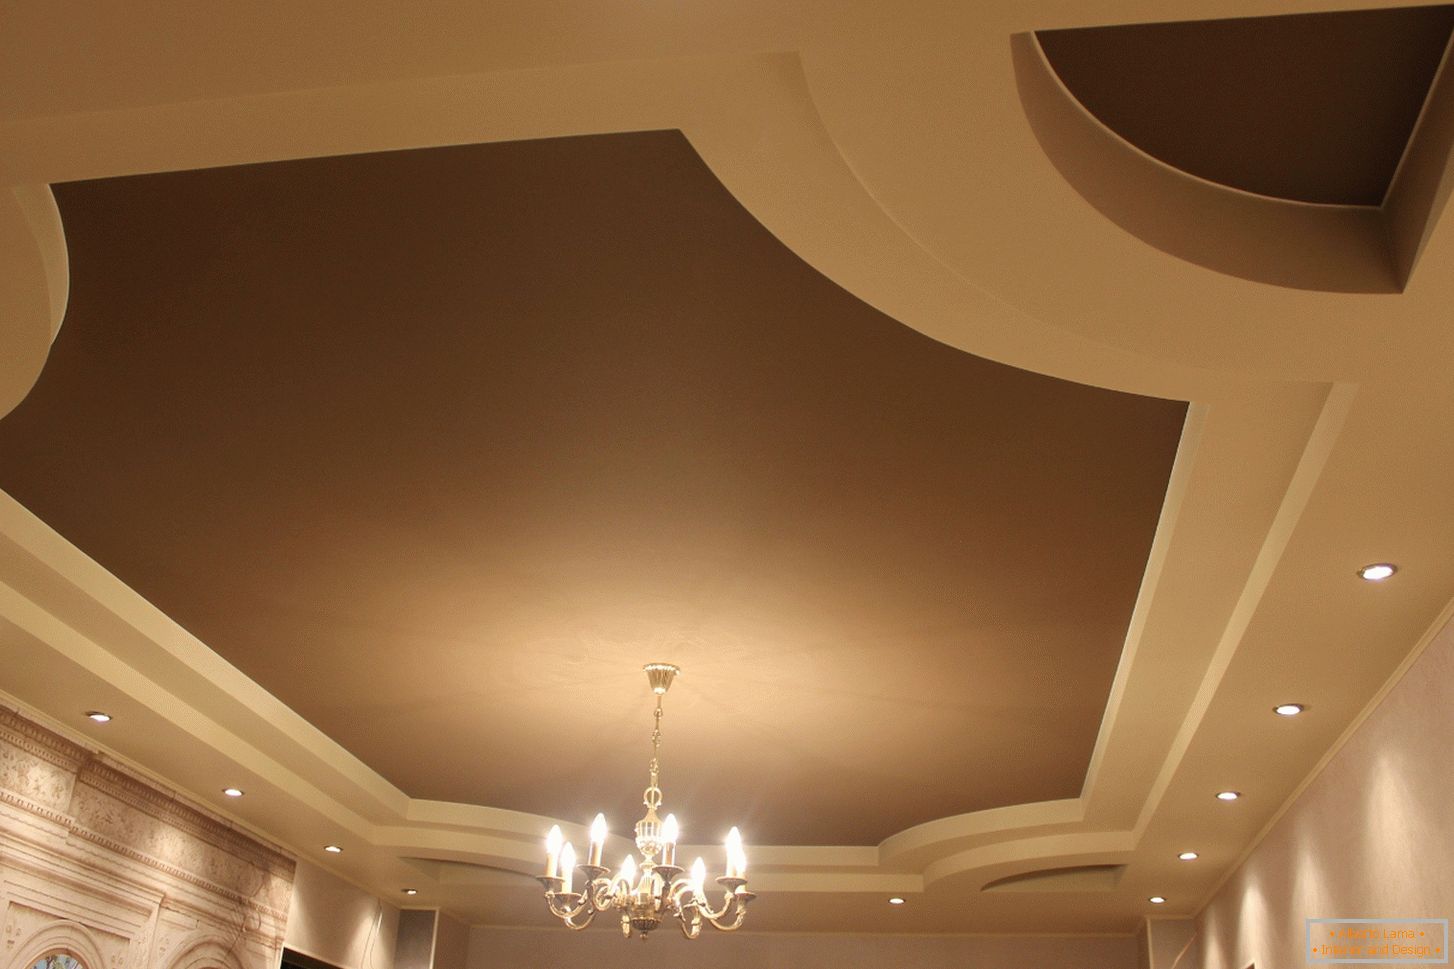 Matt stretch PVC ceilings for a guest room in a country house. The multi-tier construction of ceilings looks interesting in light beige and dark brown color.